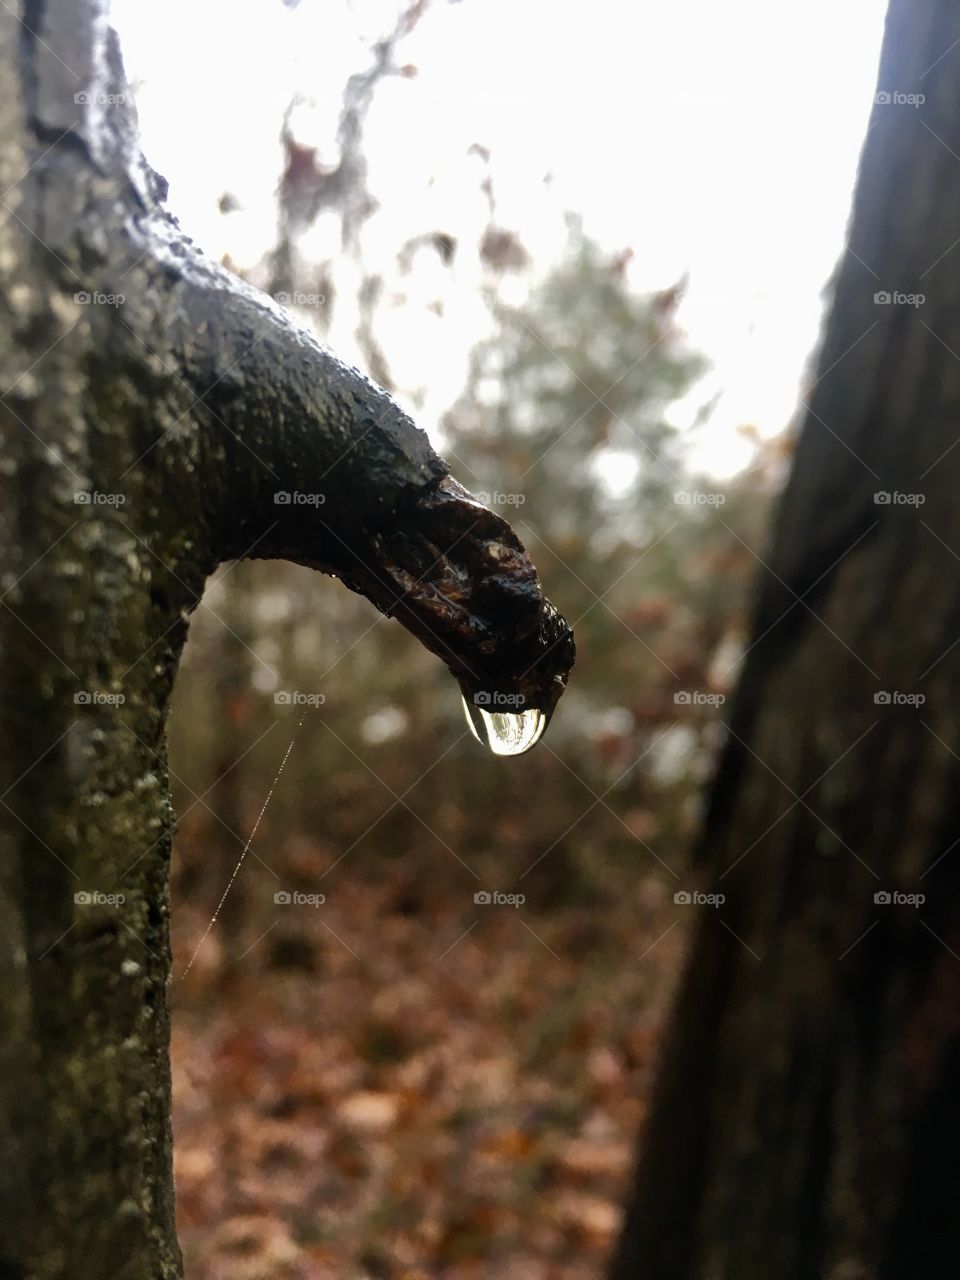 Raindrop clinging to a sprig